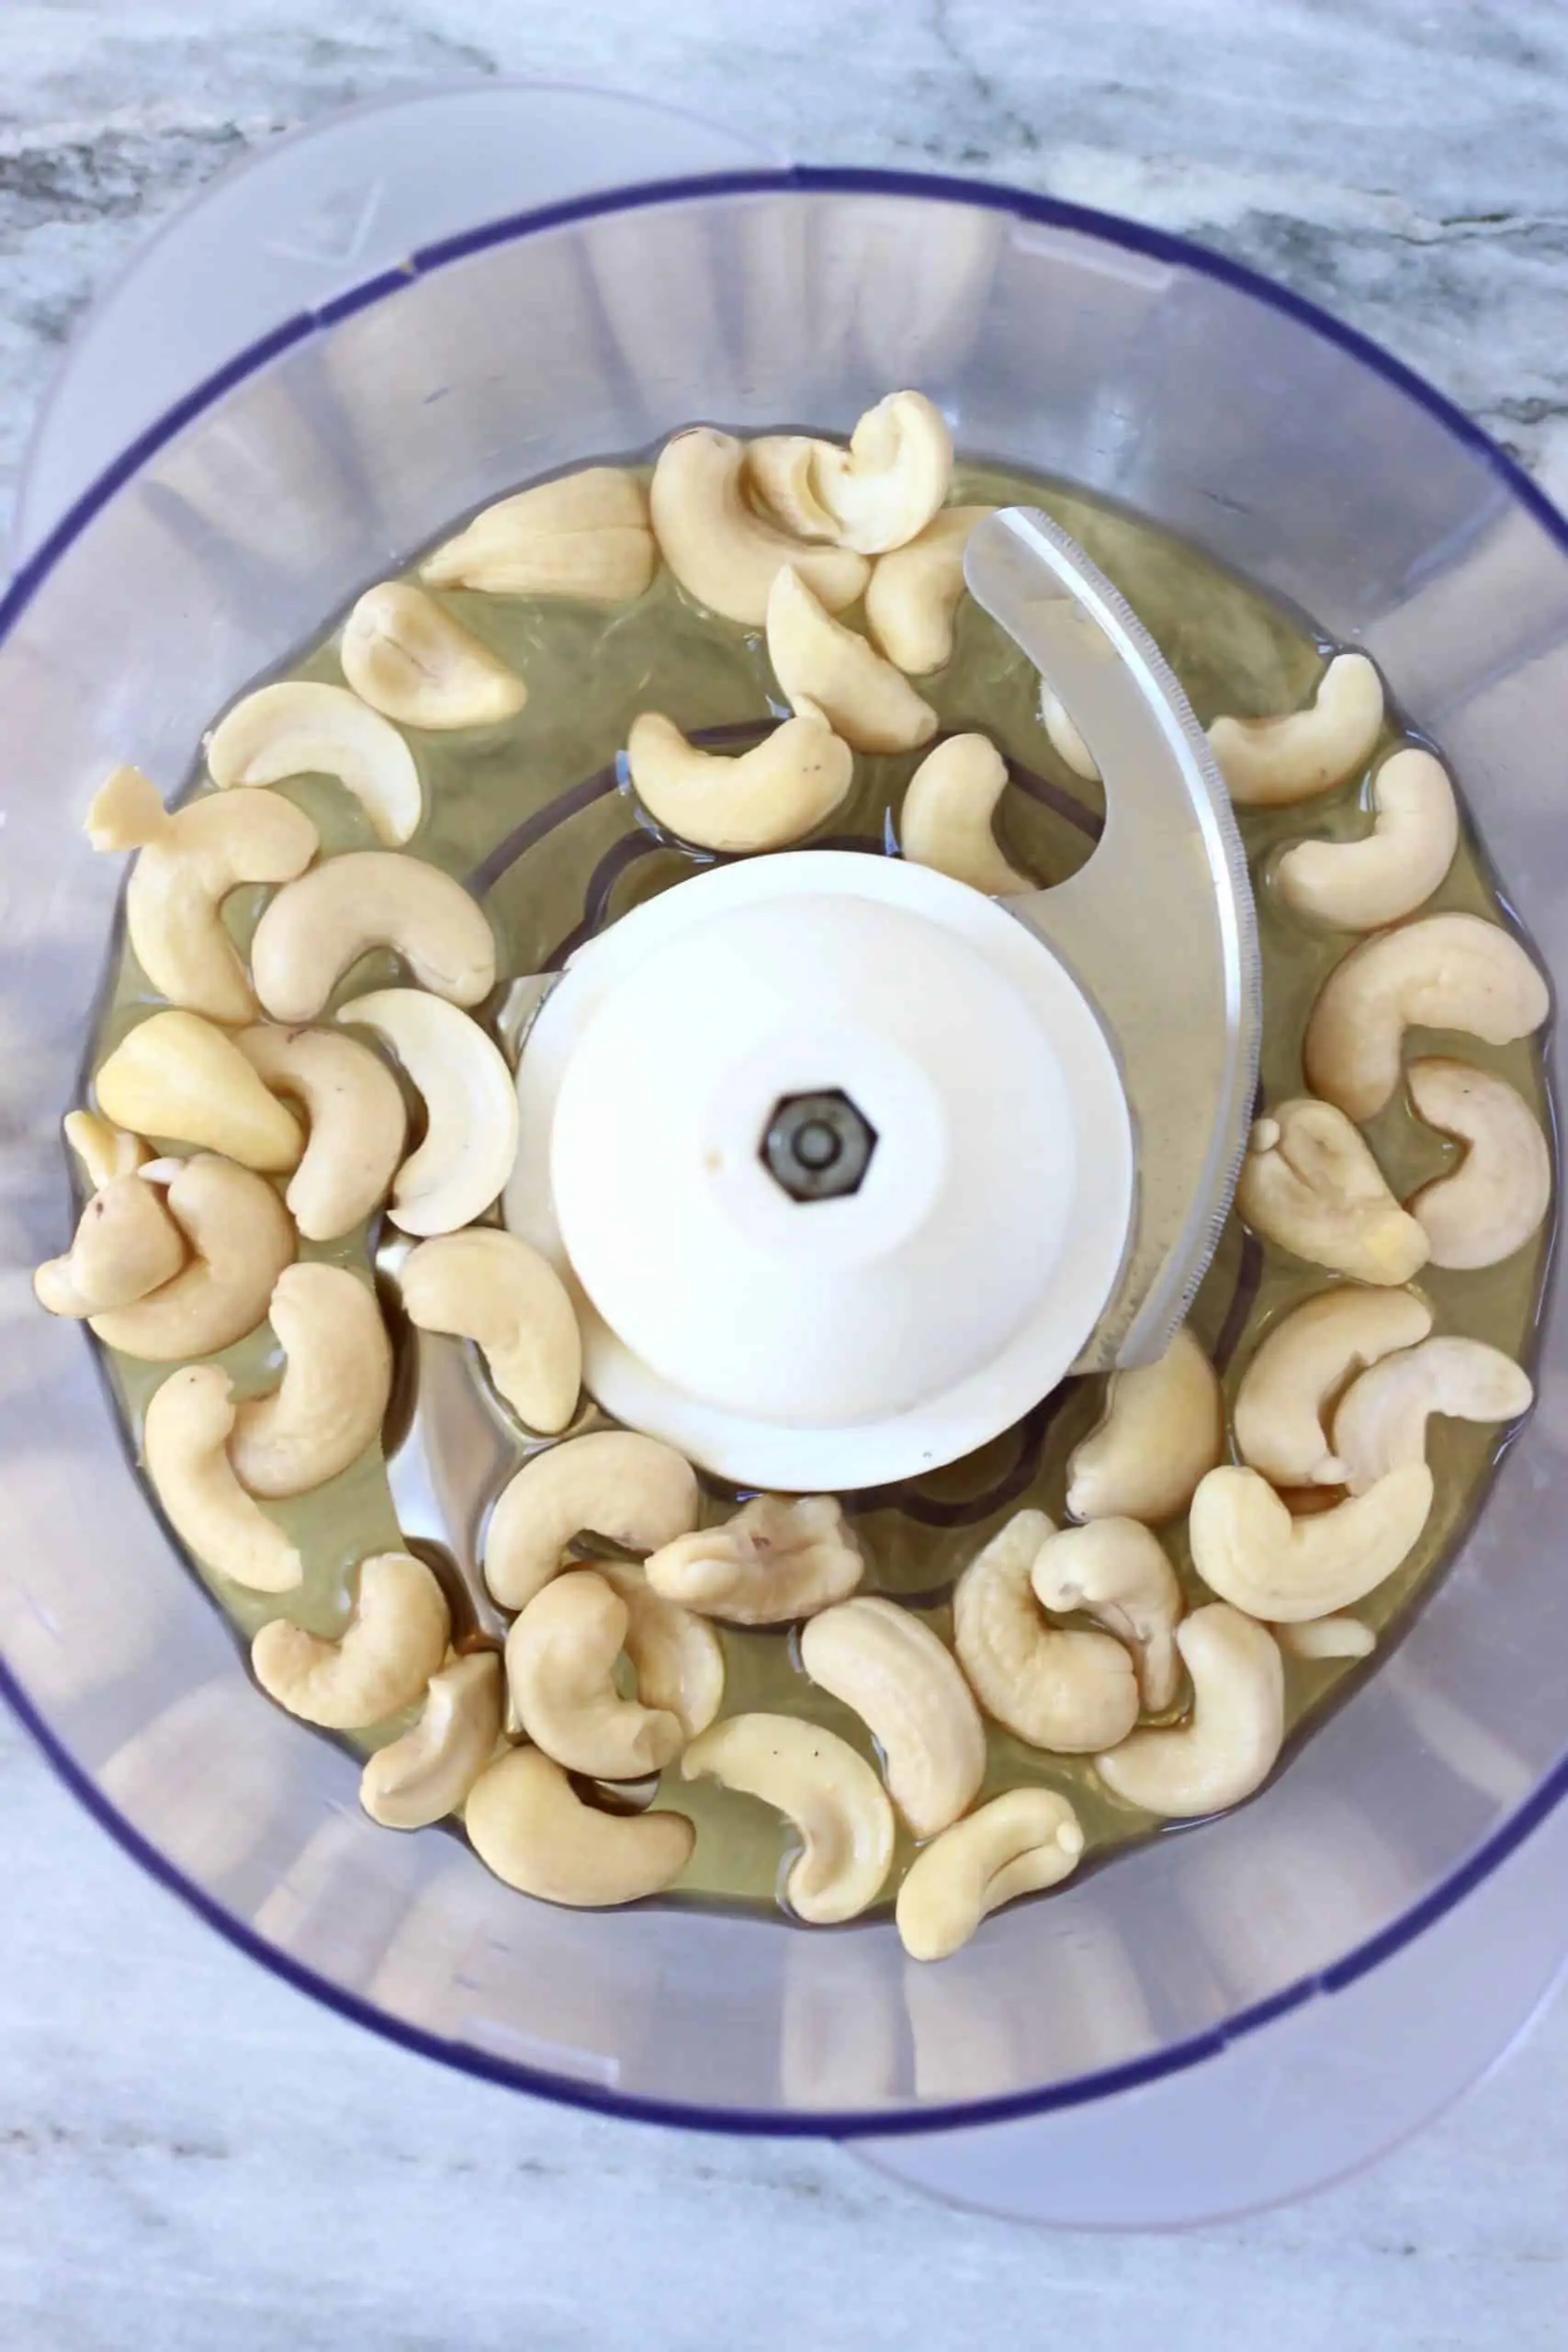 Cashew nuts, maple syrup and almond milk in a food processor